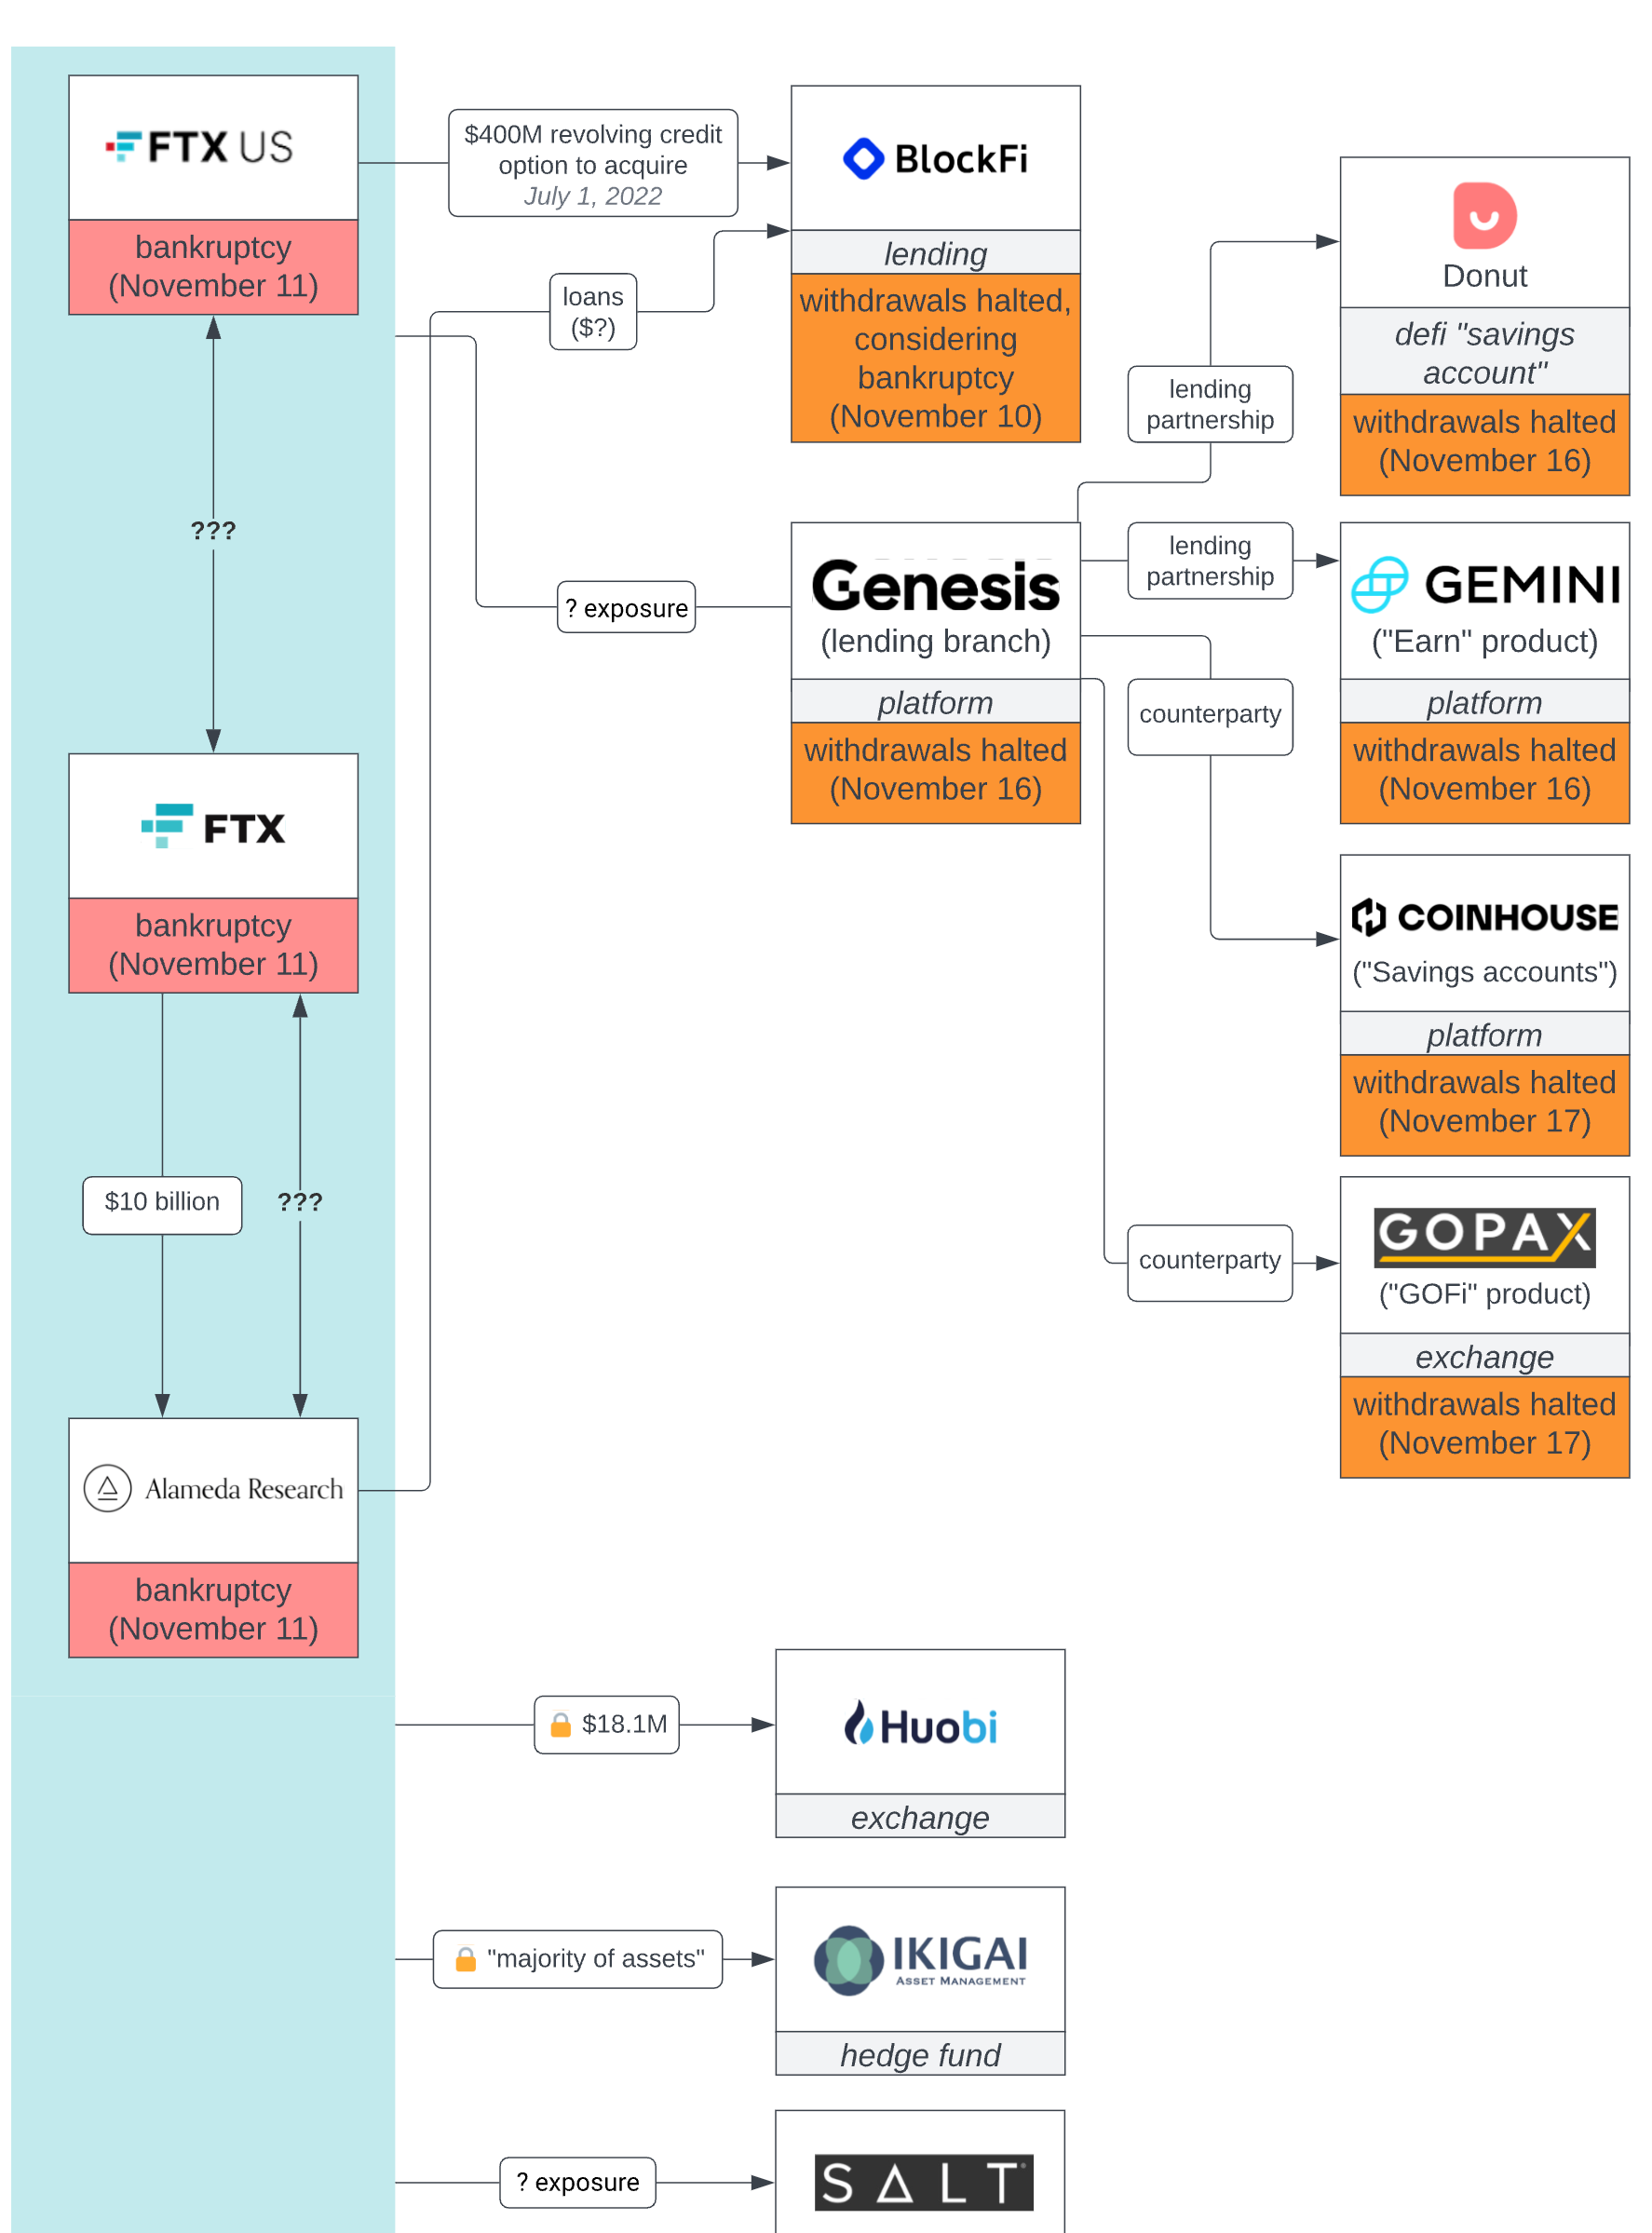 A chart showing the links between FTX and related companies, and the companies who had exposure to them.